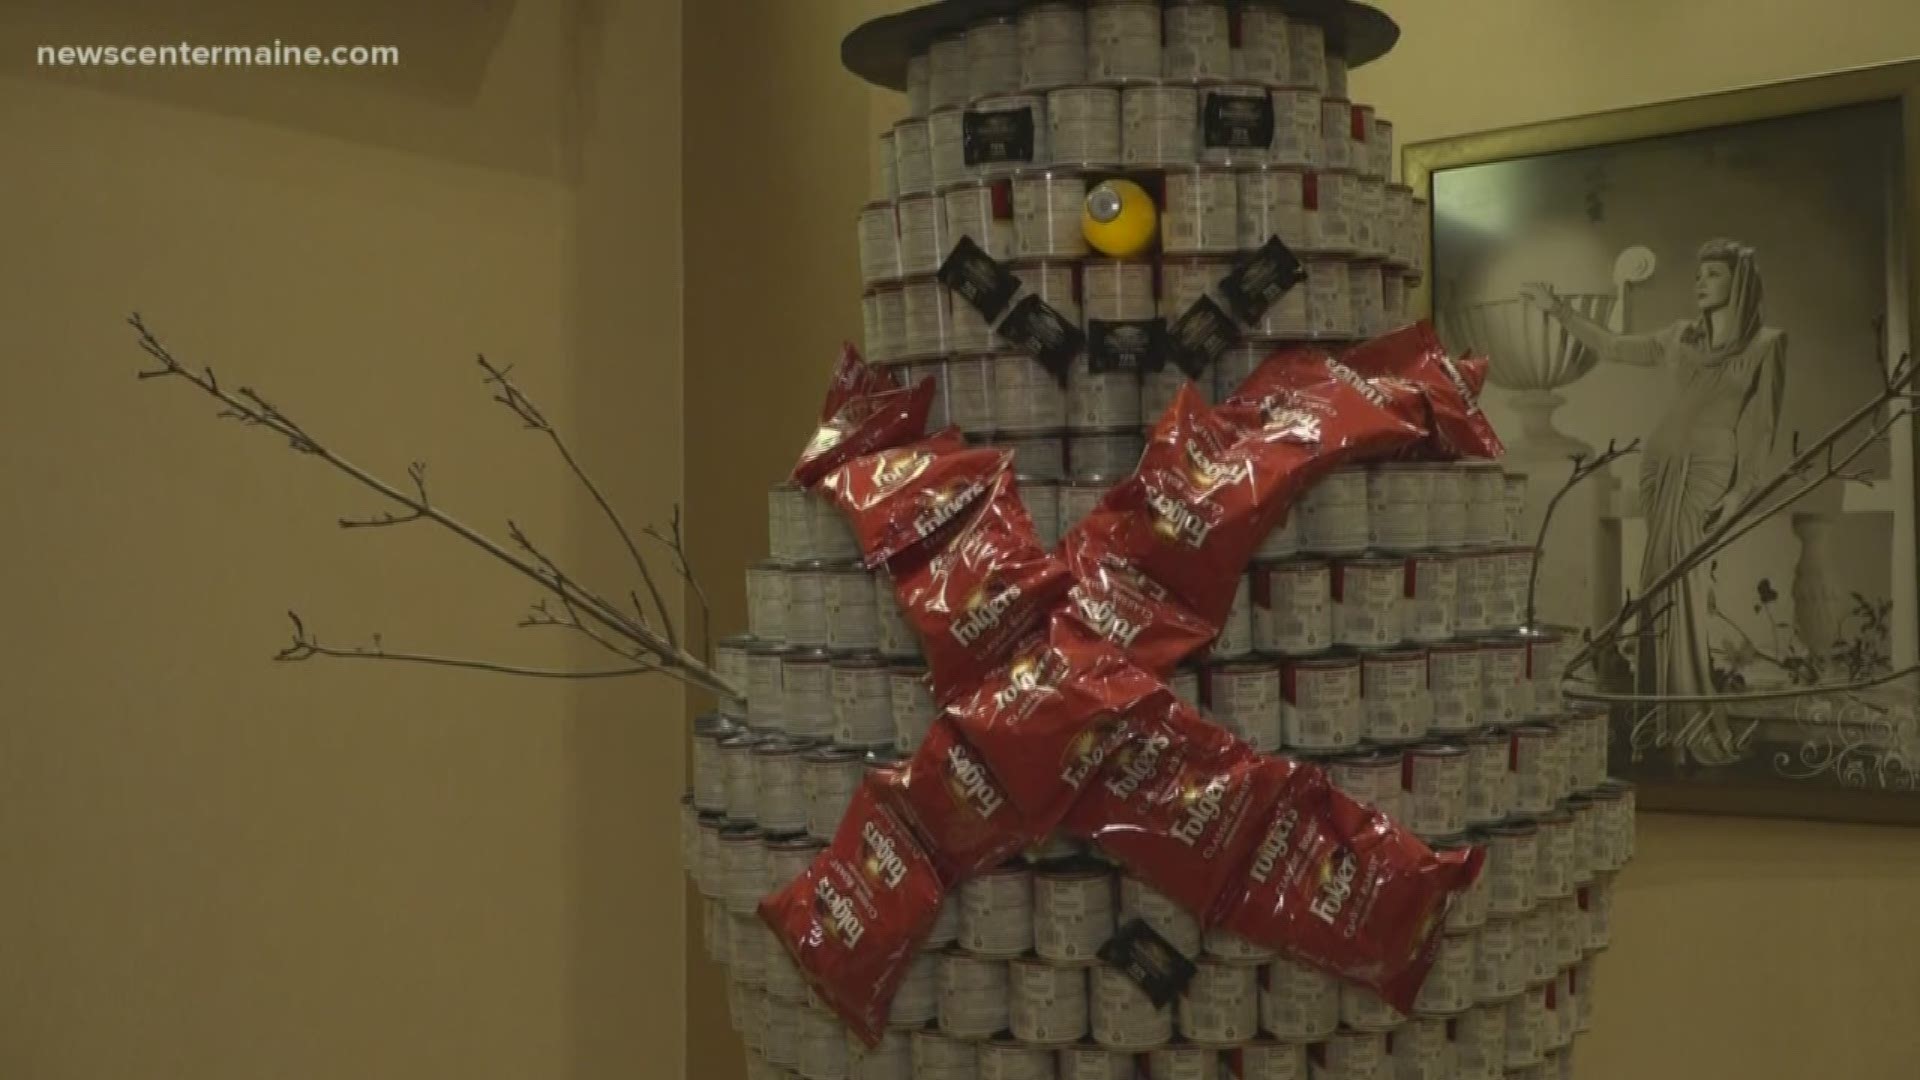 Hollywood Casino donated 1,400 lbs. of Campbell's soup to Good Shepherd Food Bank via its annual art sculpture.